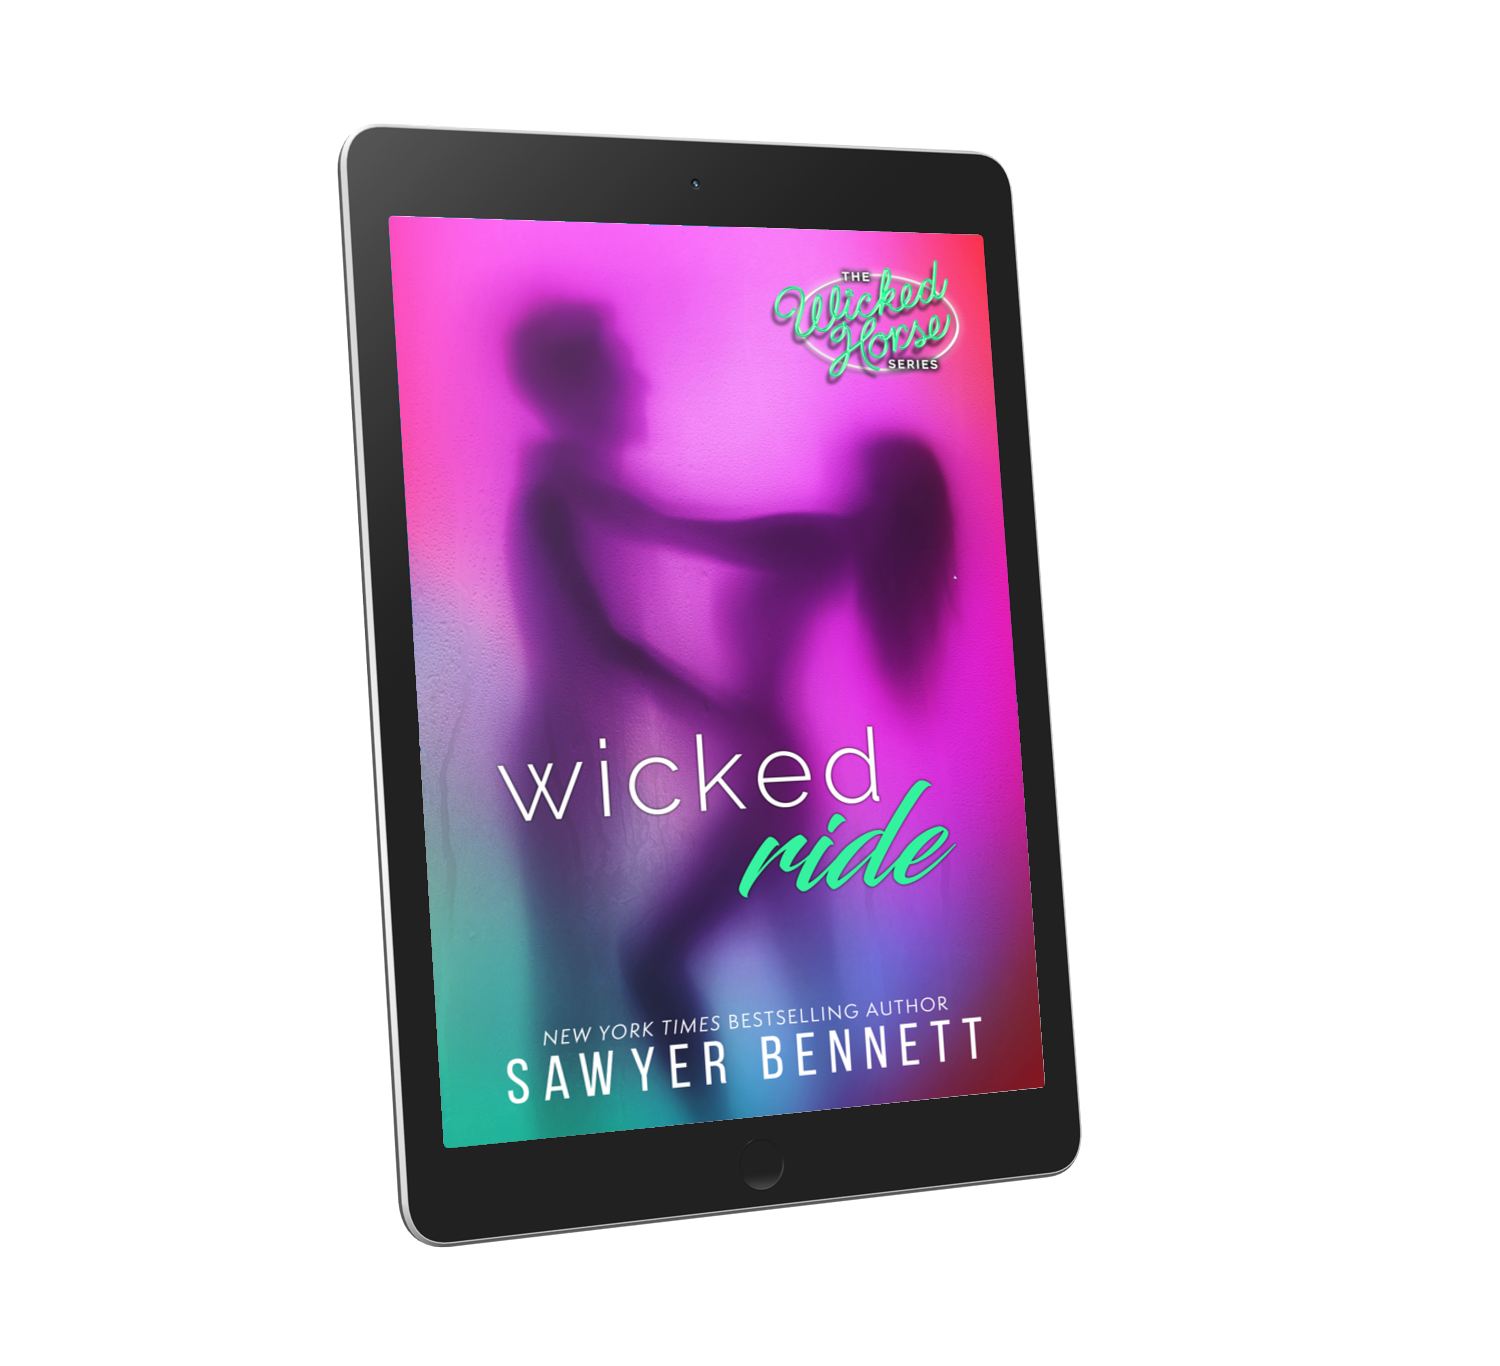 Wicked Ride The Wicked Horse Sawyer Bennett 1